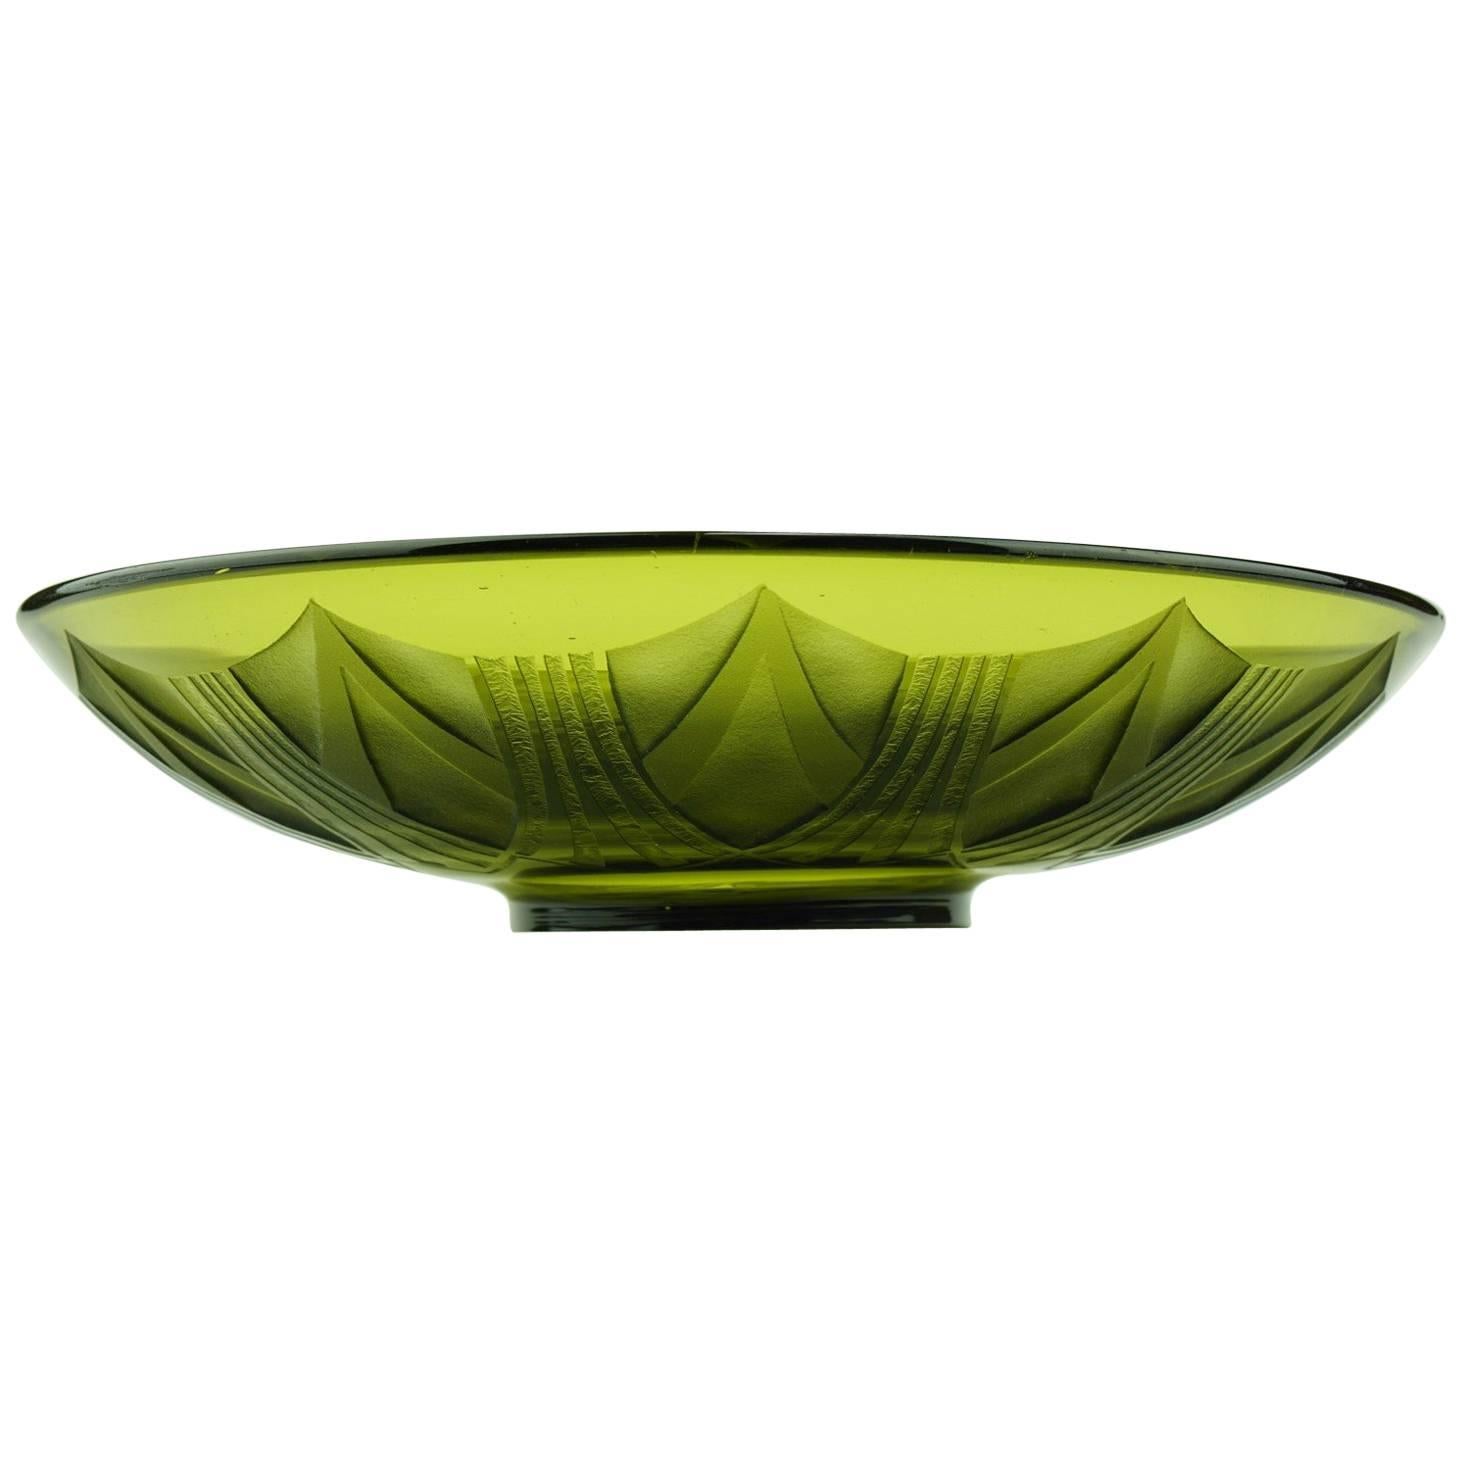 French Art Deco Legras Acid-Etched Glass Coupe For Sale